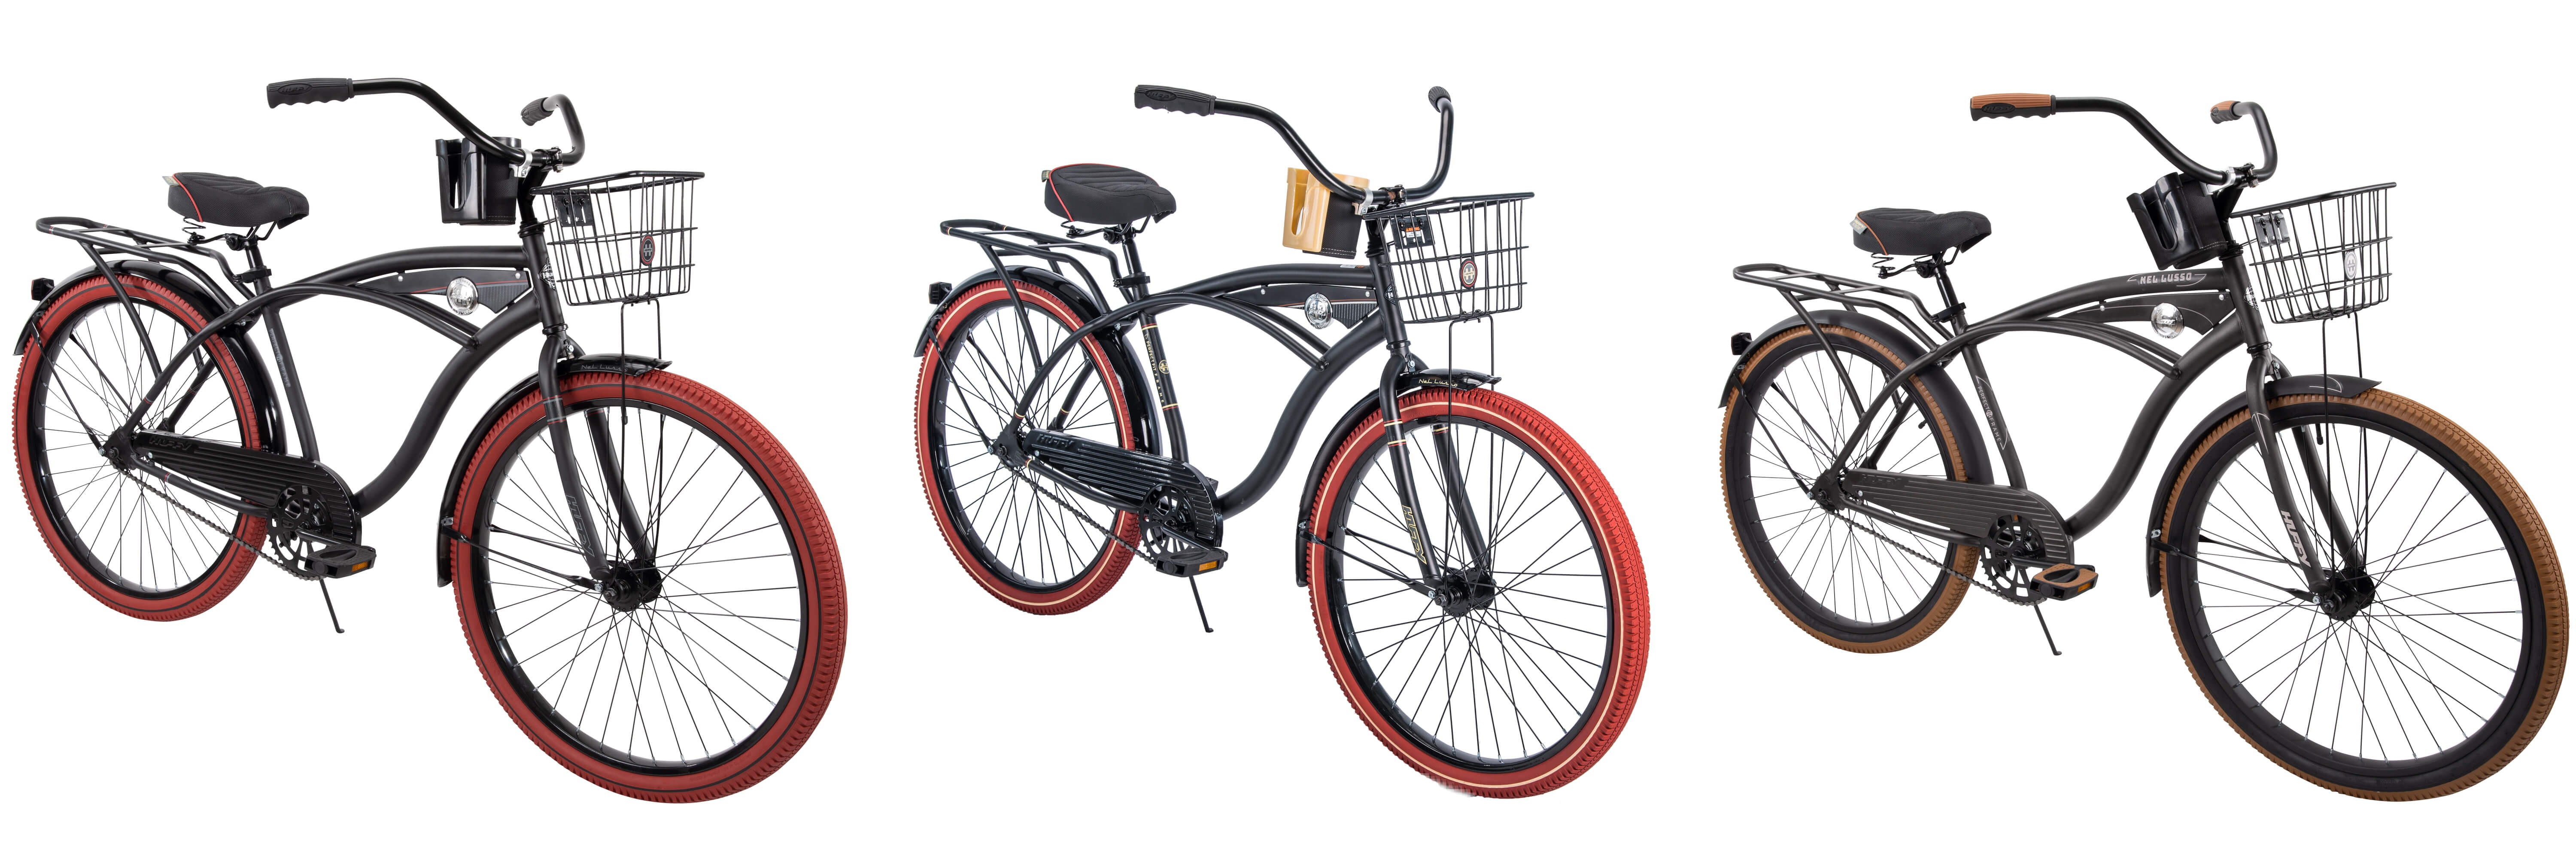 huffy nel lusso bicycles